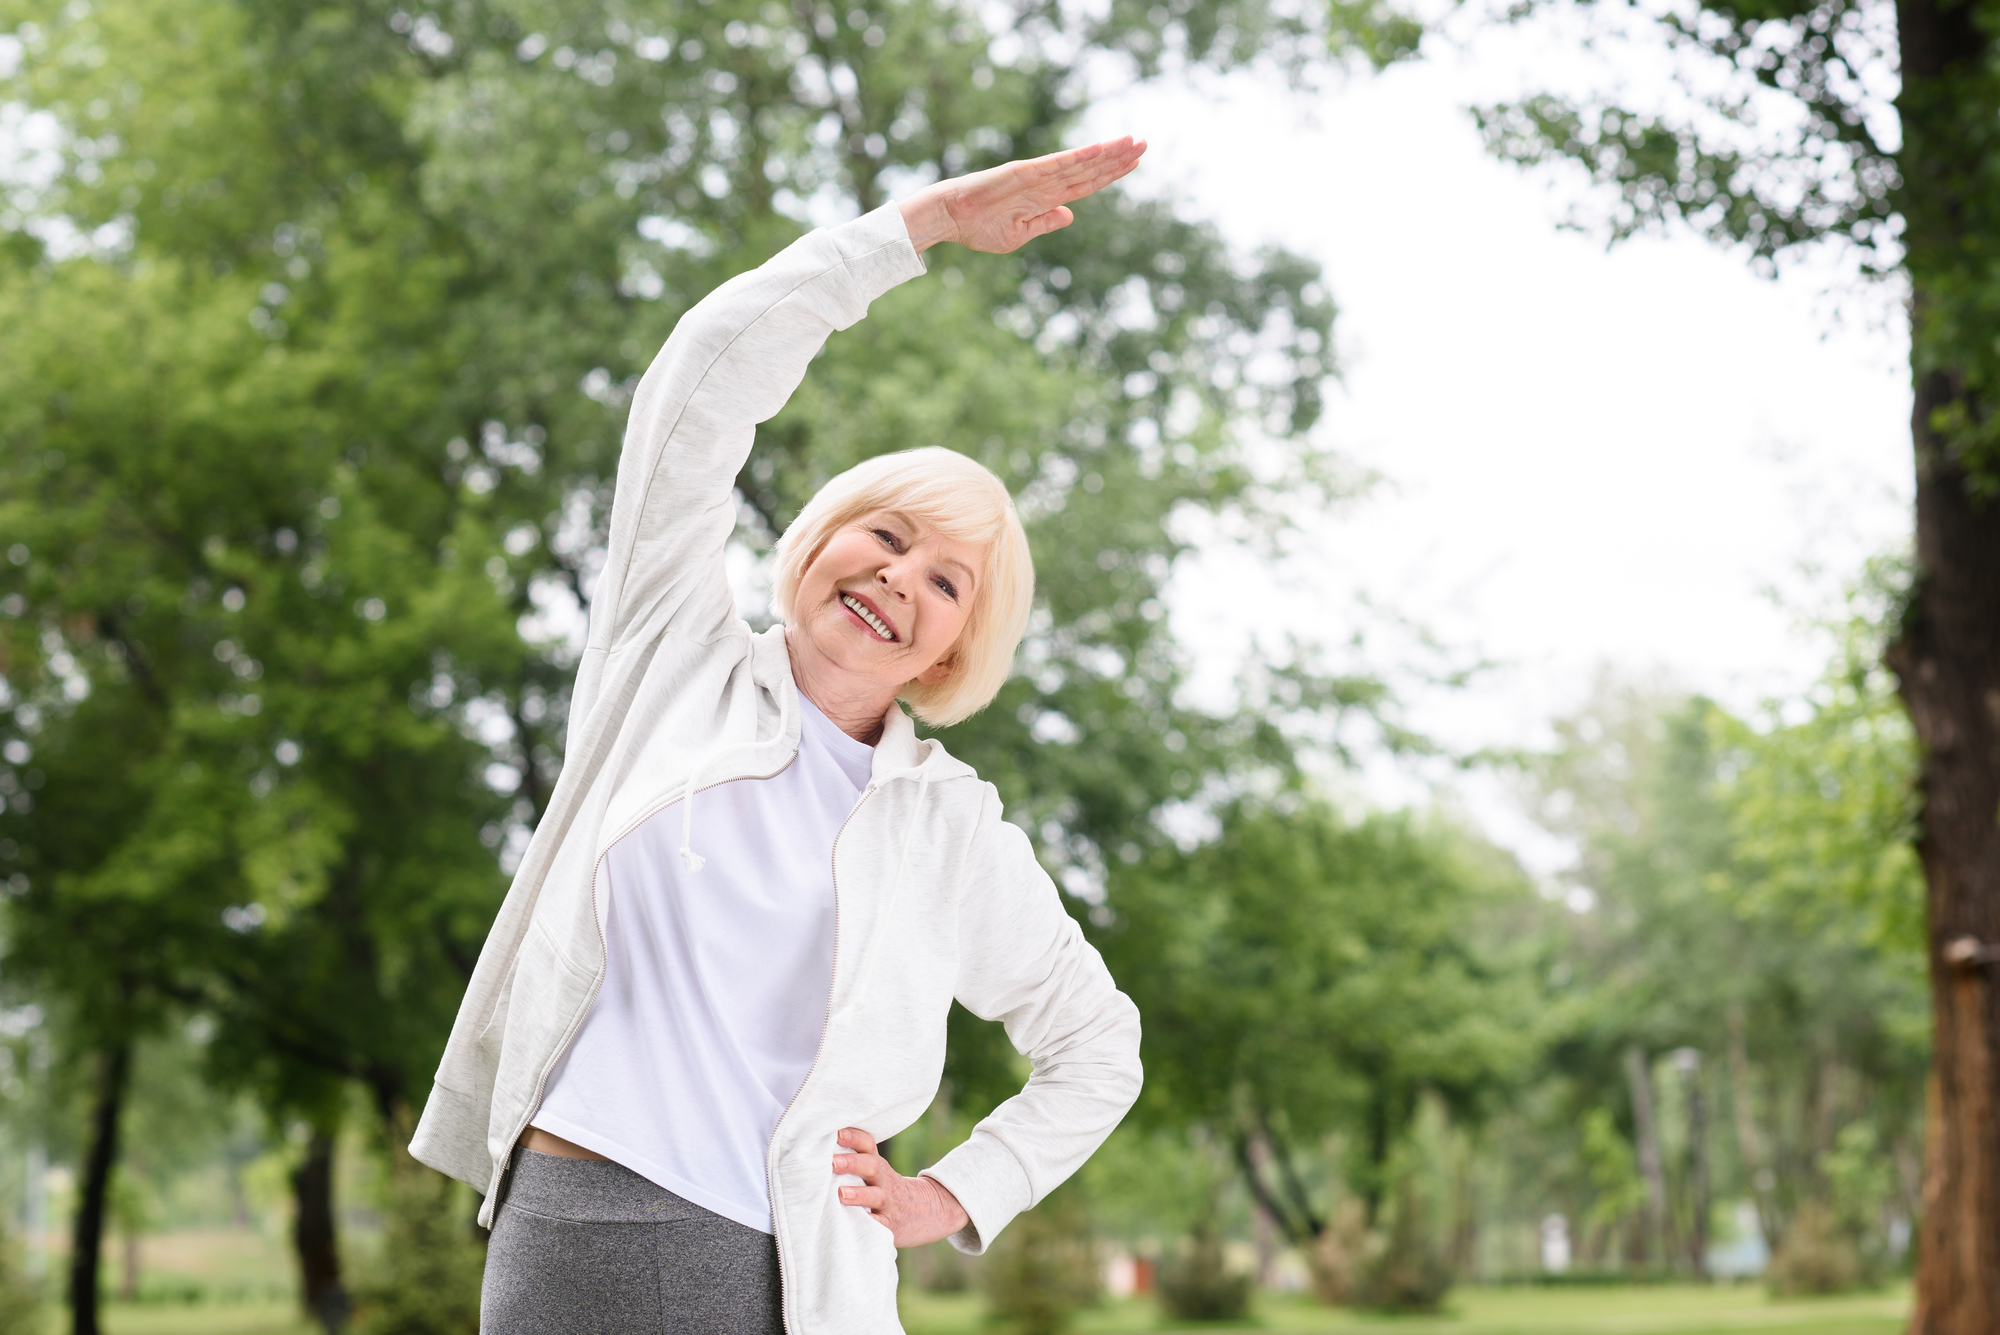 Senior woman stretching. Stretching is especially beneficial for seniors who may be dealing with compromised mobility, flexibility and posture.